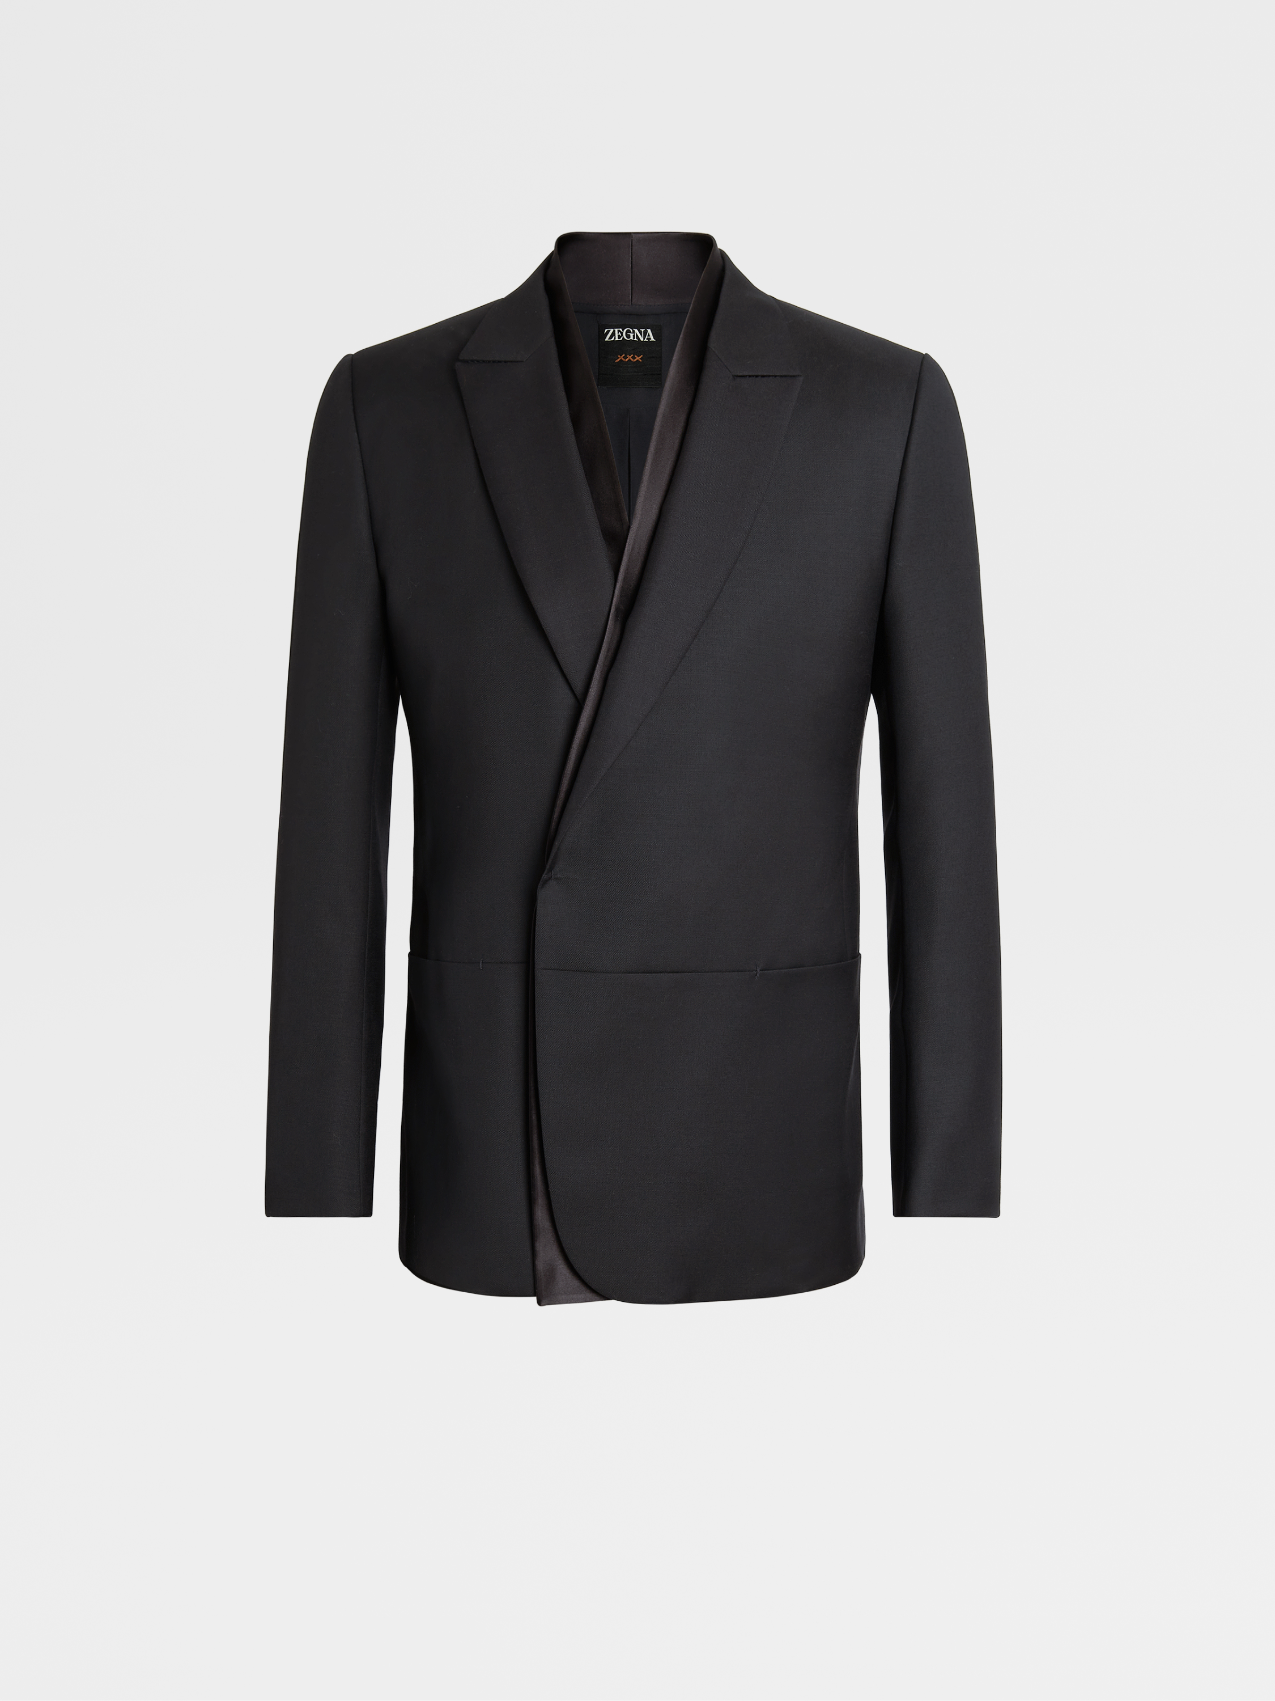 Black Wool and Mohair Evening Jacket